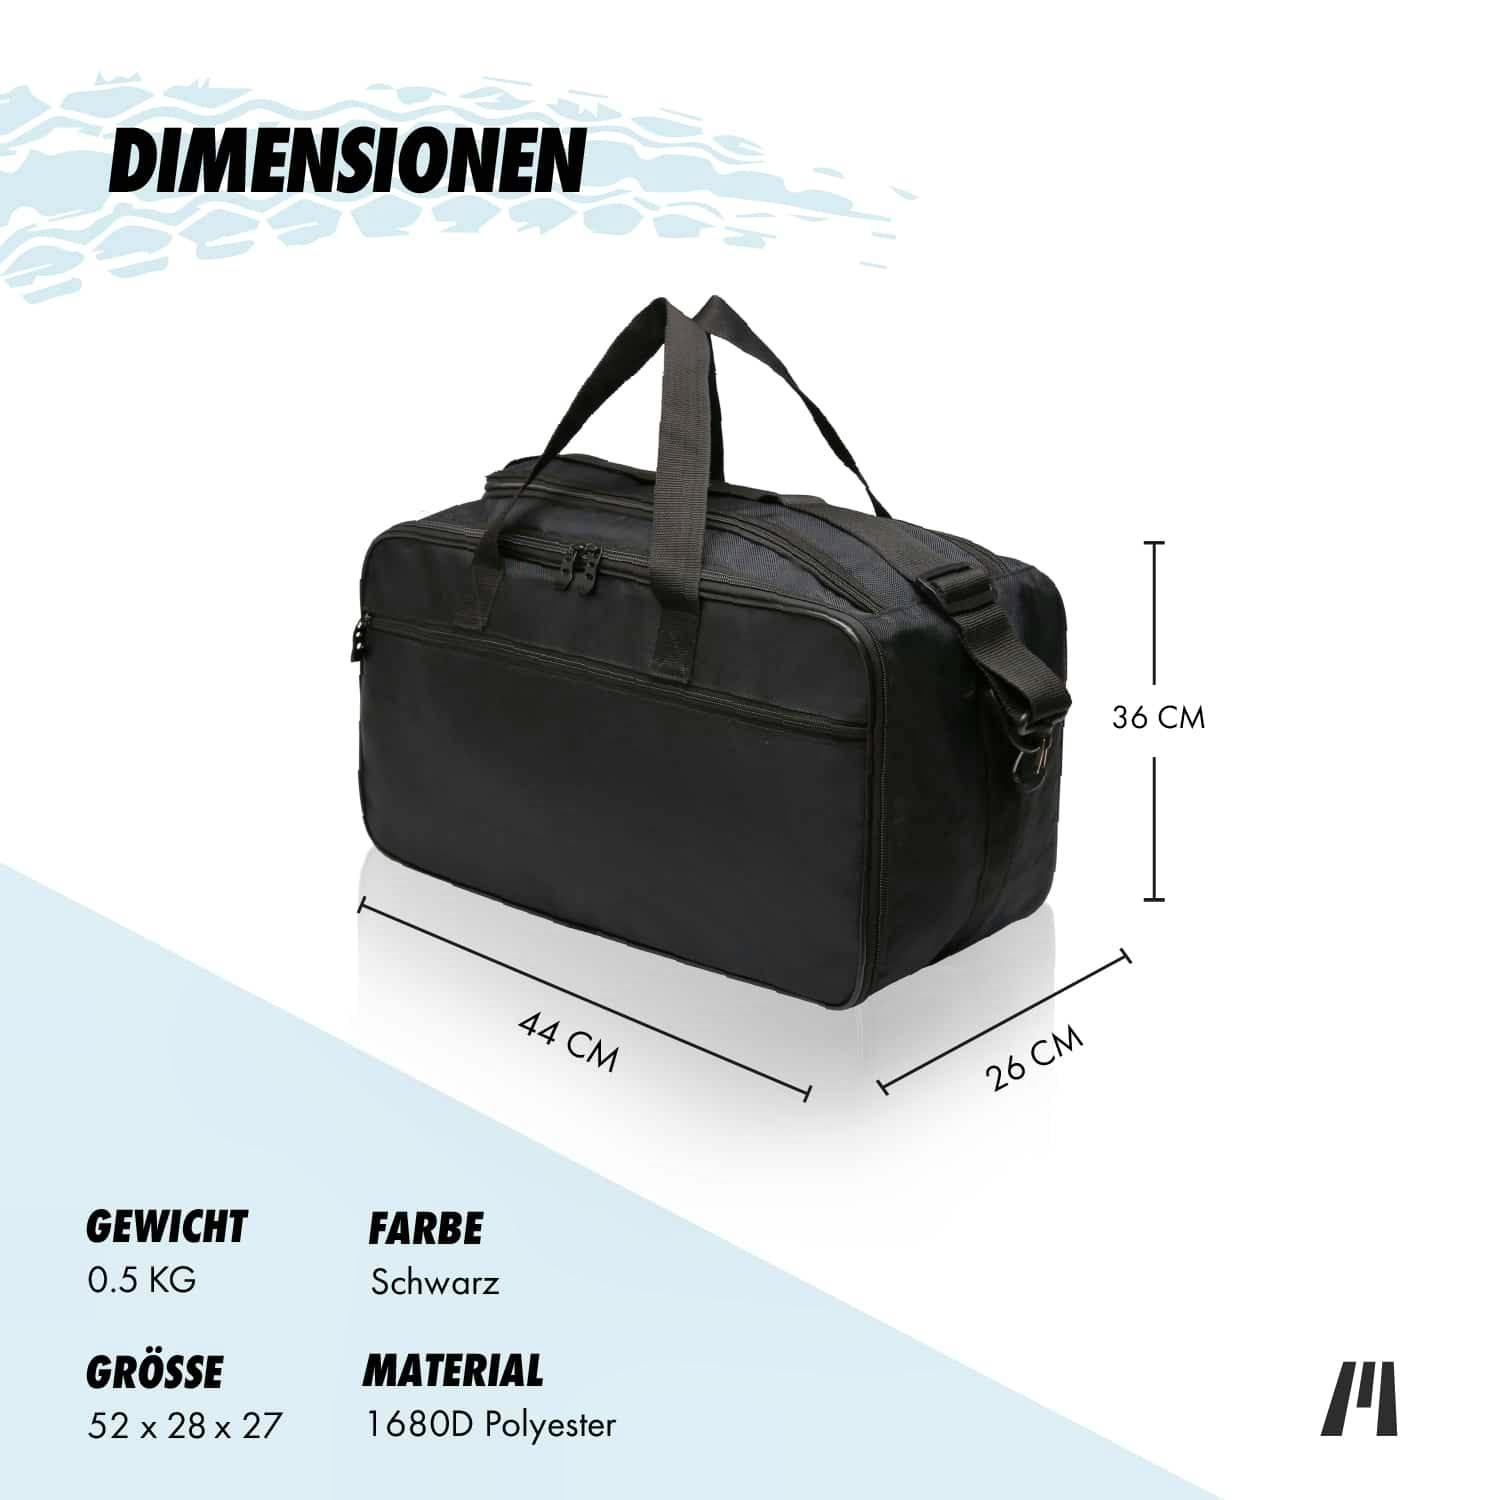 Picture 7 of Inner bags for panniers and top box BMW K1600GT/GTL K1200/1300GT R1200/1250RT